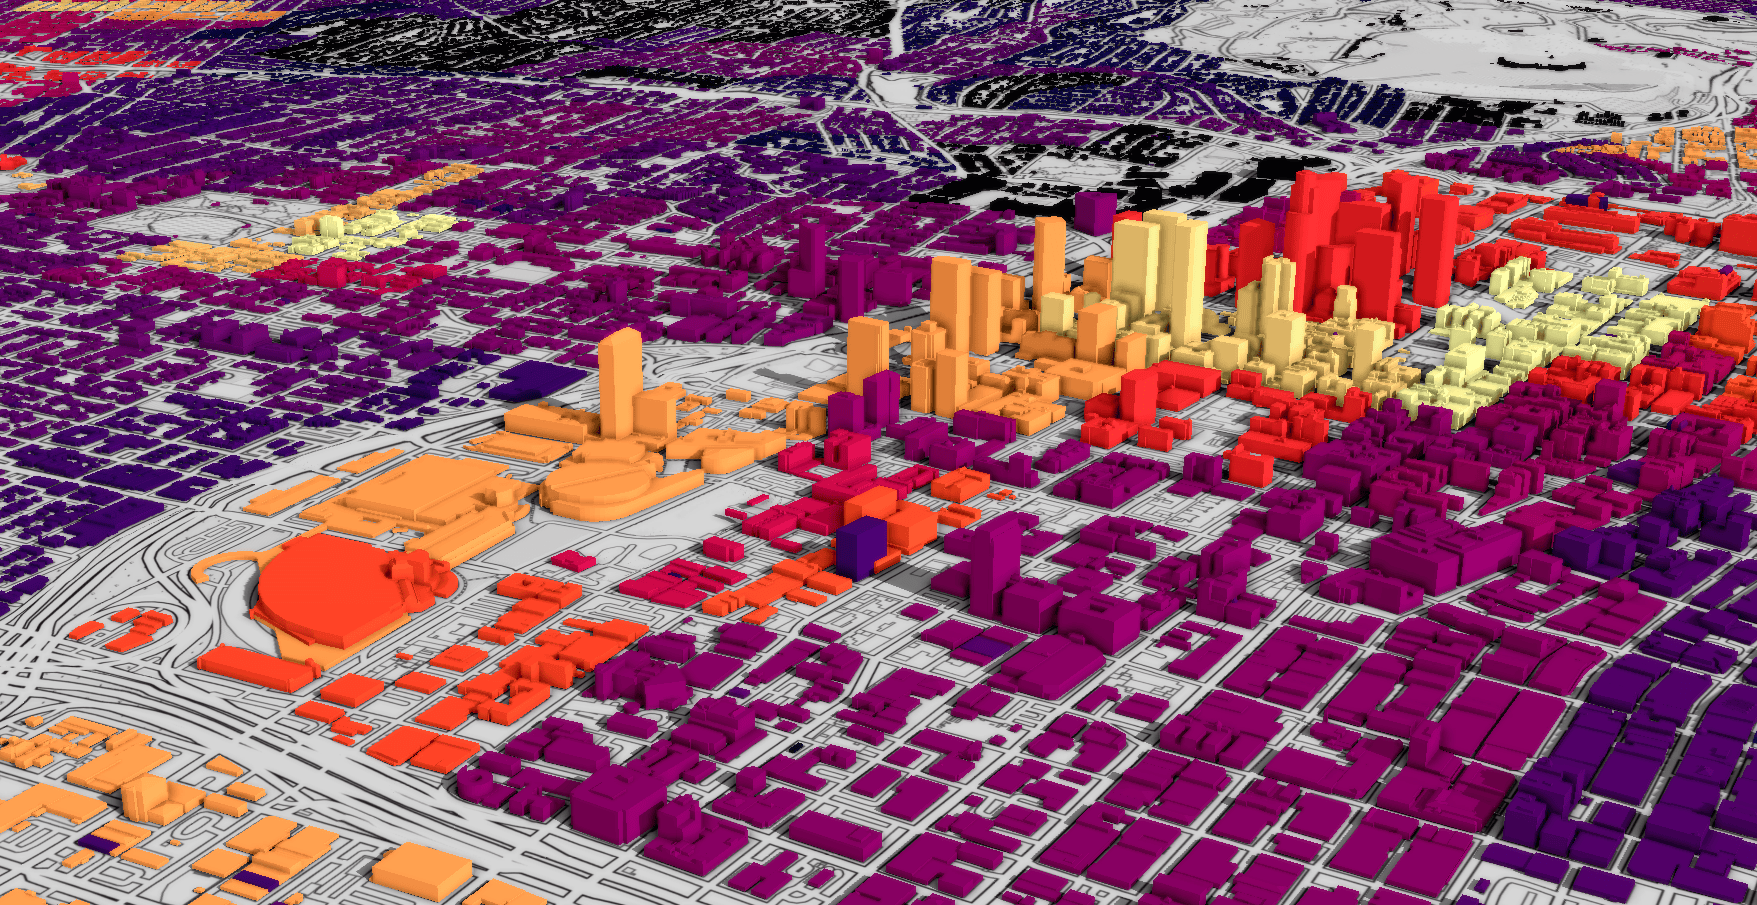 Transit Accessibility Analysis, shown using 3D buildings